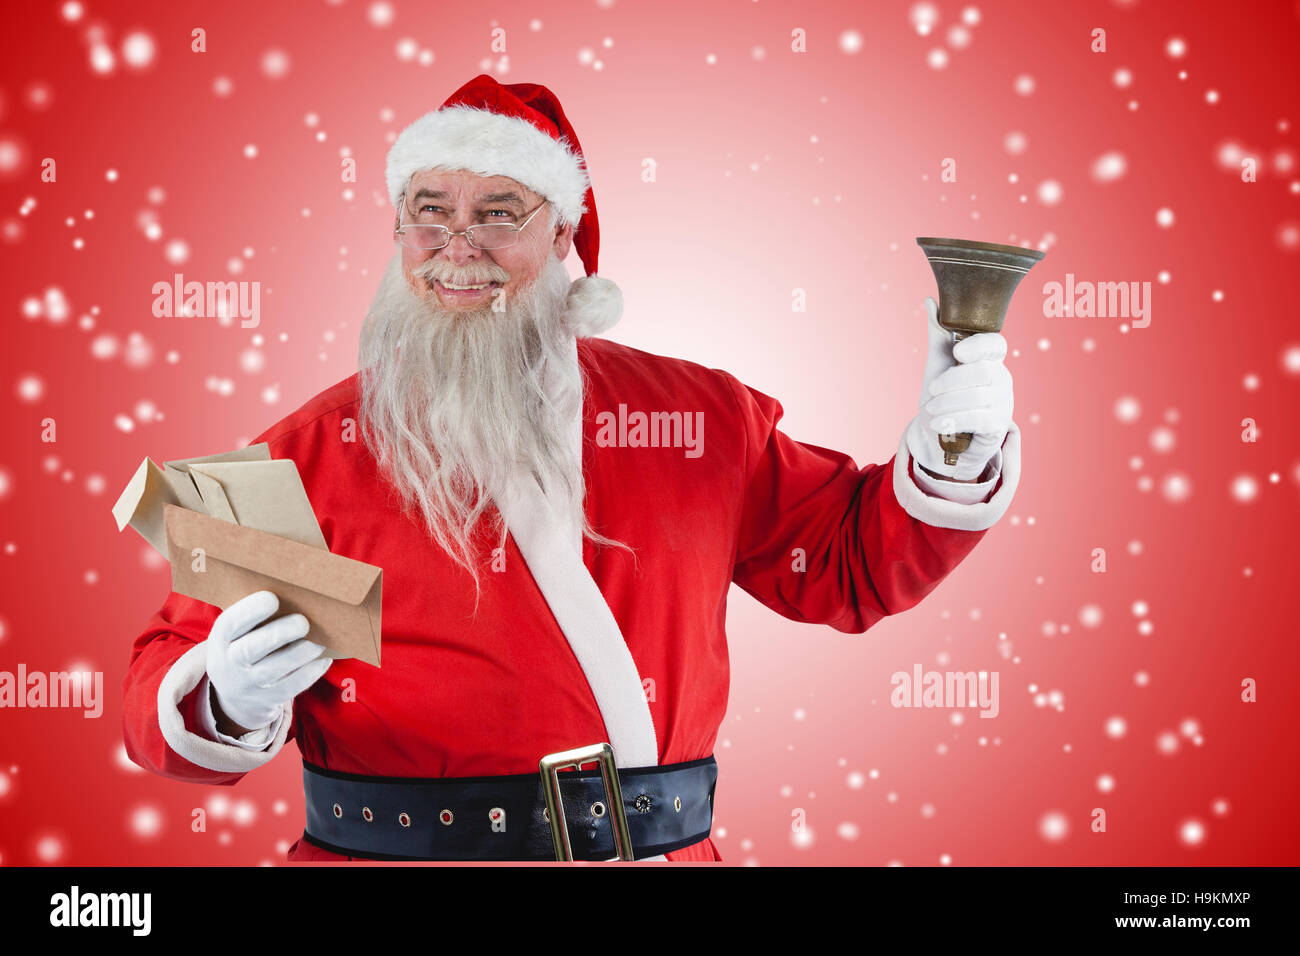 Composite image of santa claus holding envelope and bell Stock Photo